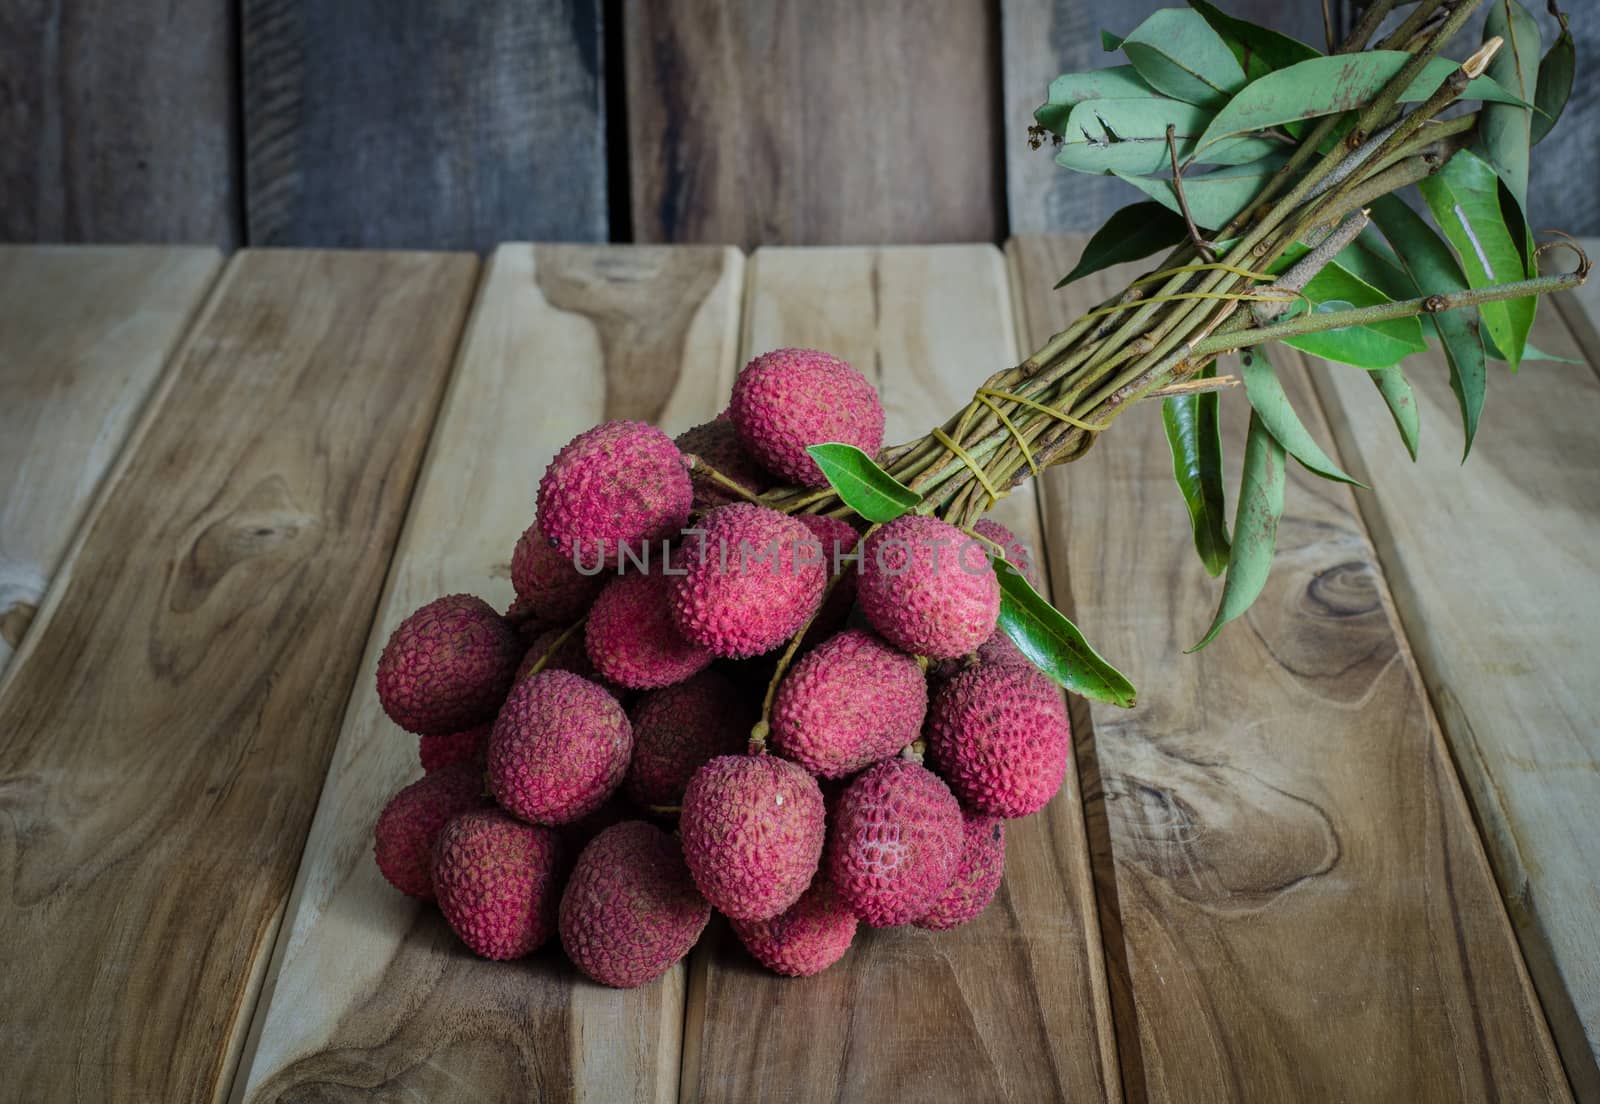 Lychee or Litchi on a wooden table. by photobyphotoboy